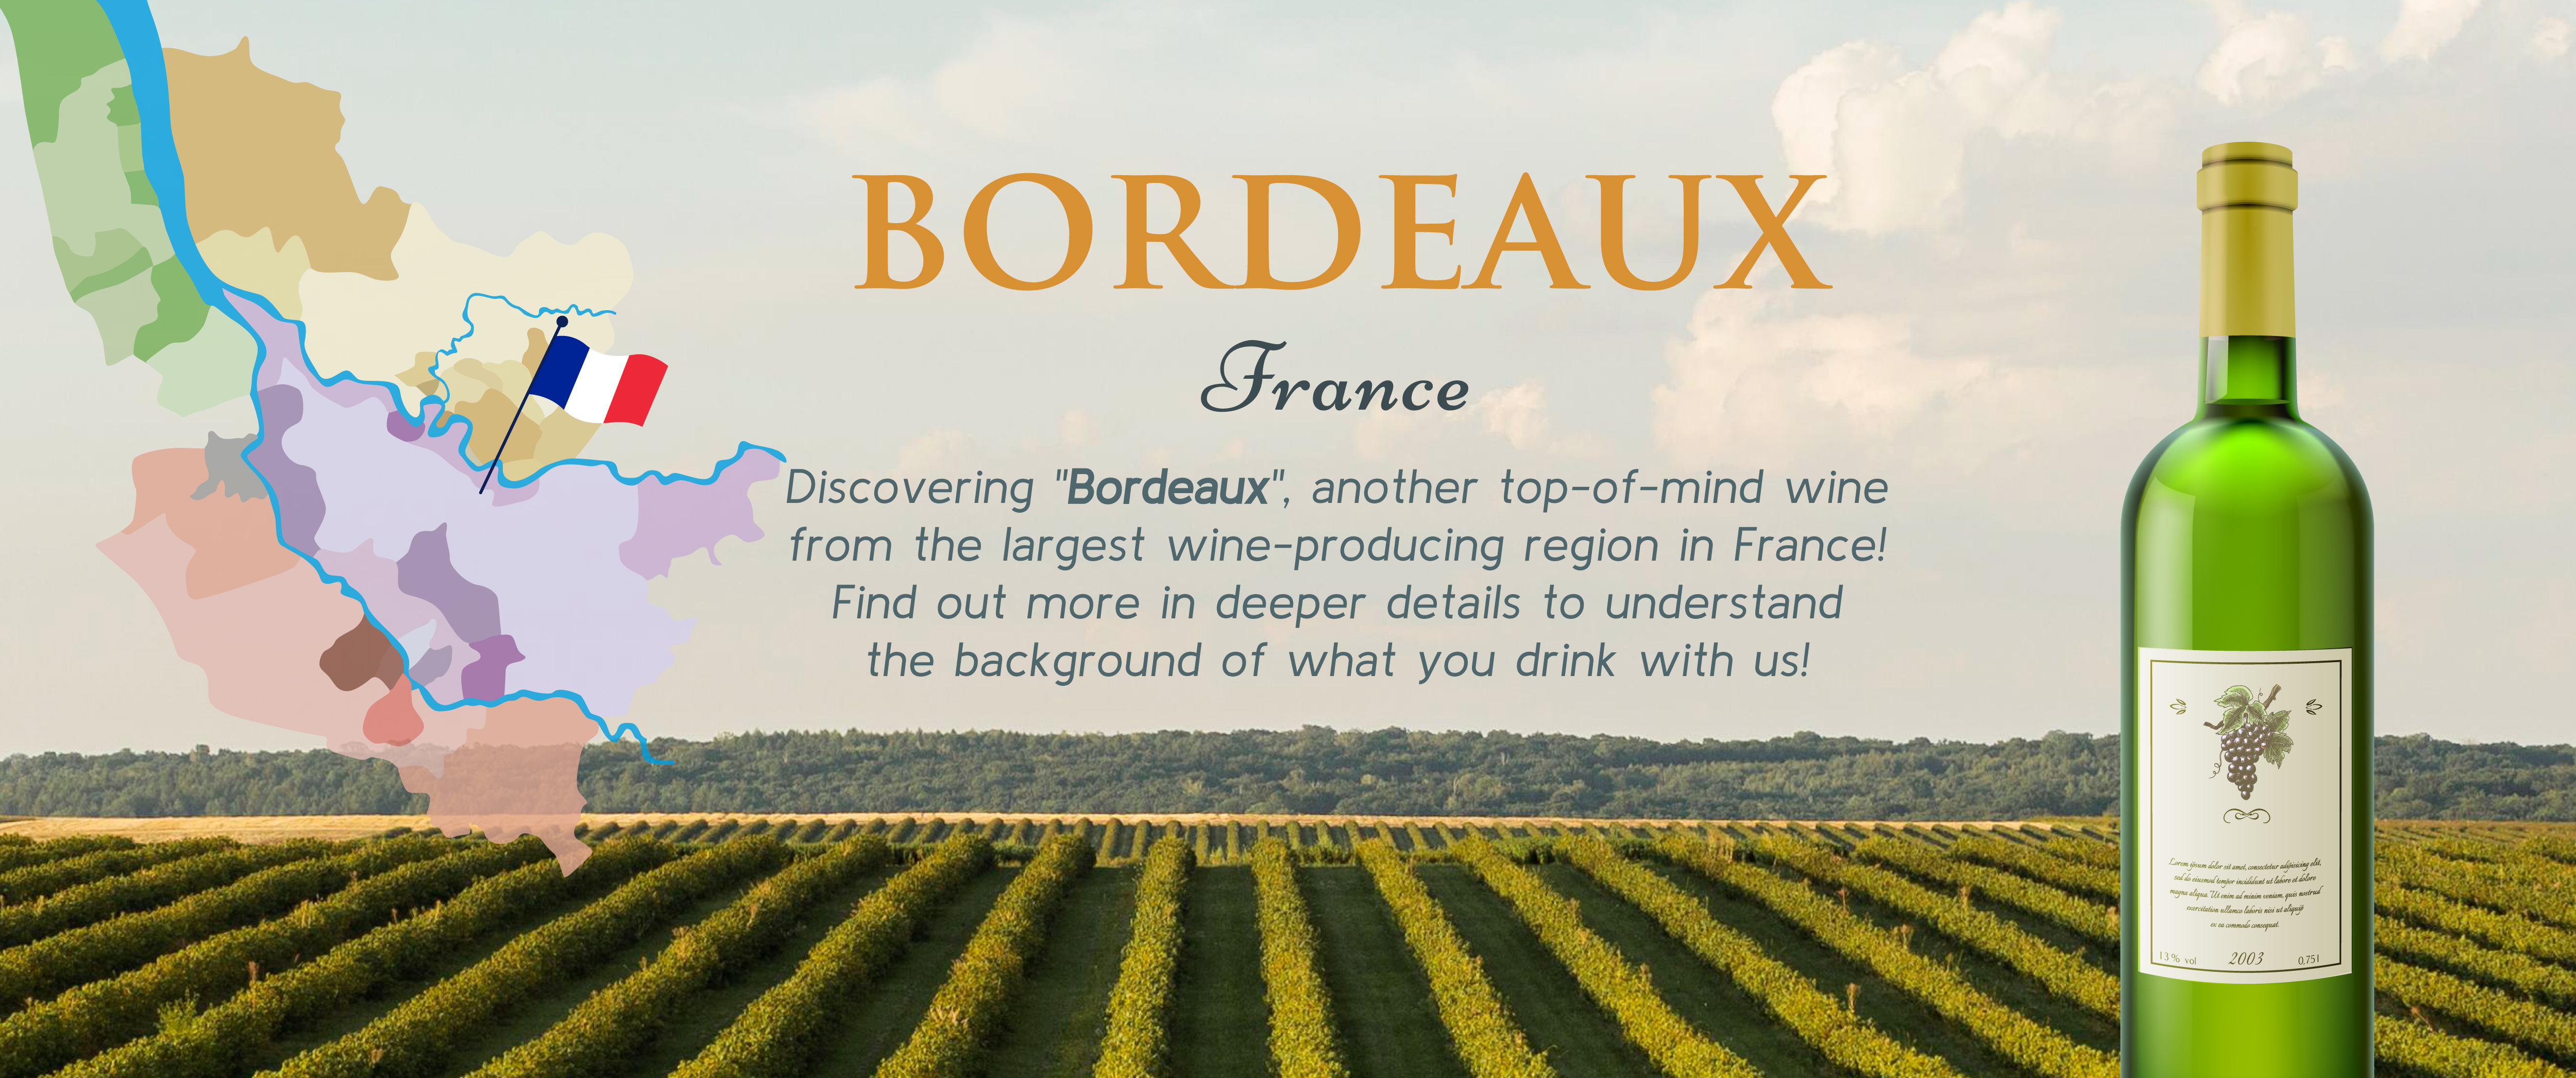 Get to Know More About Bordeaux